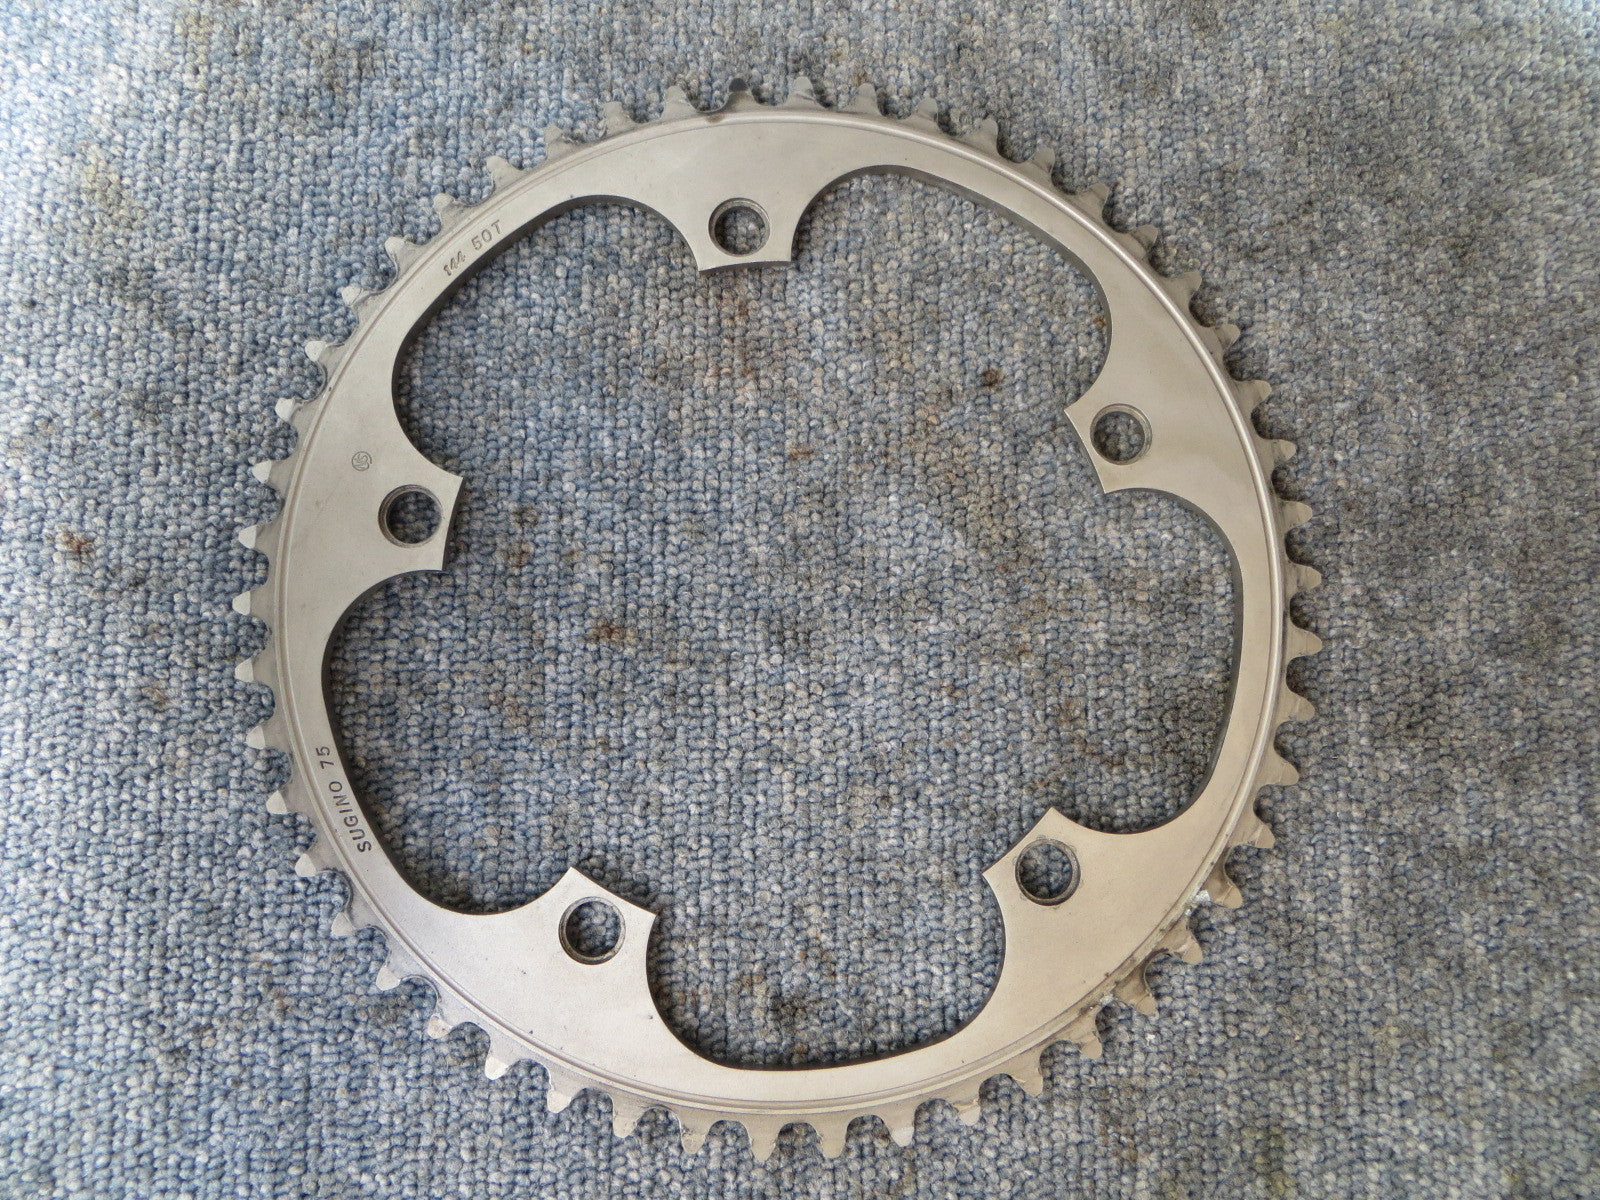 Sugino 75 S-cubic 1/8" 144BCD NJS Chainring 50T Matte Finish (17061006)